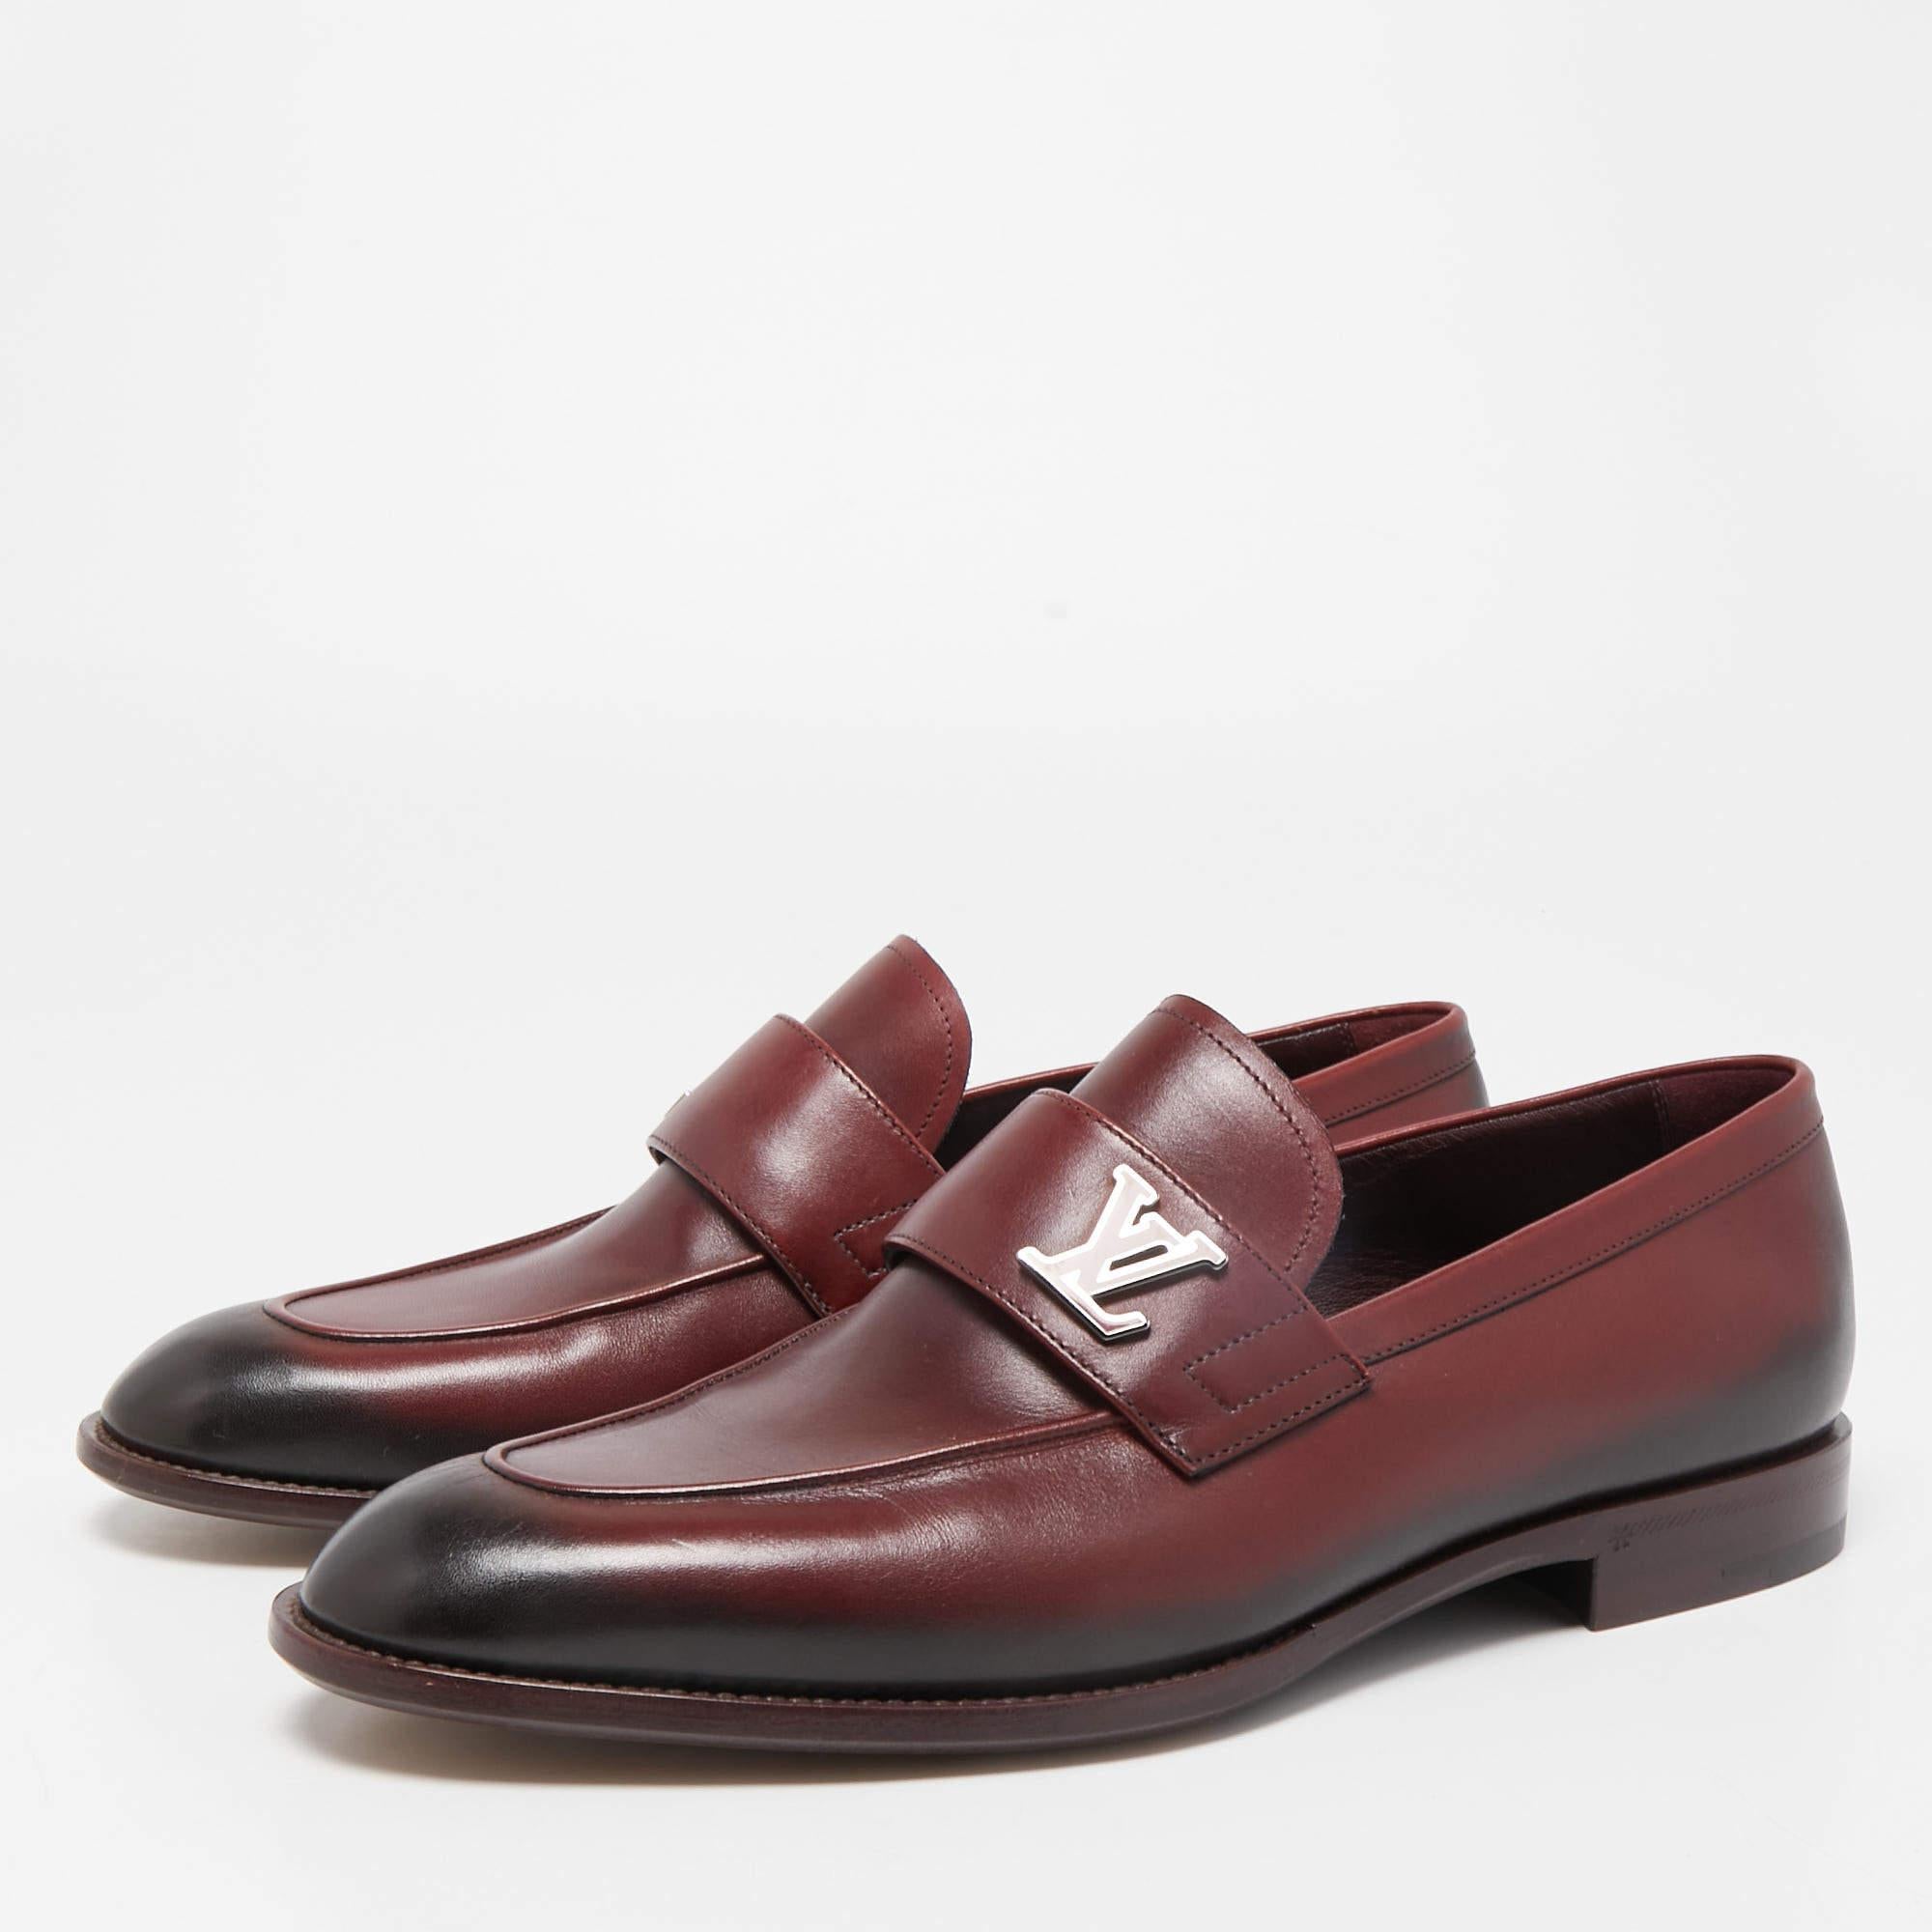 Louise Vuitton Burgundy/Black Leather Slip On Loafers Size 41 4